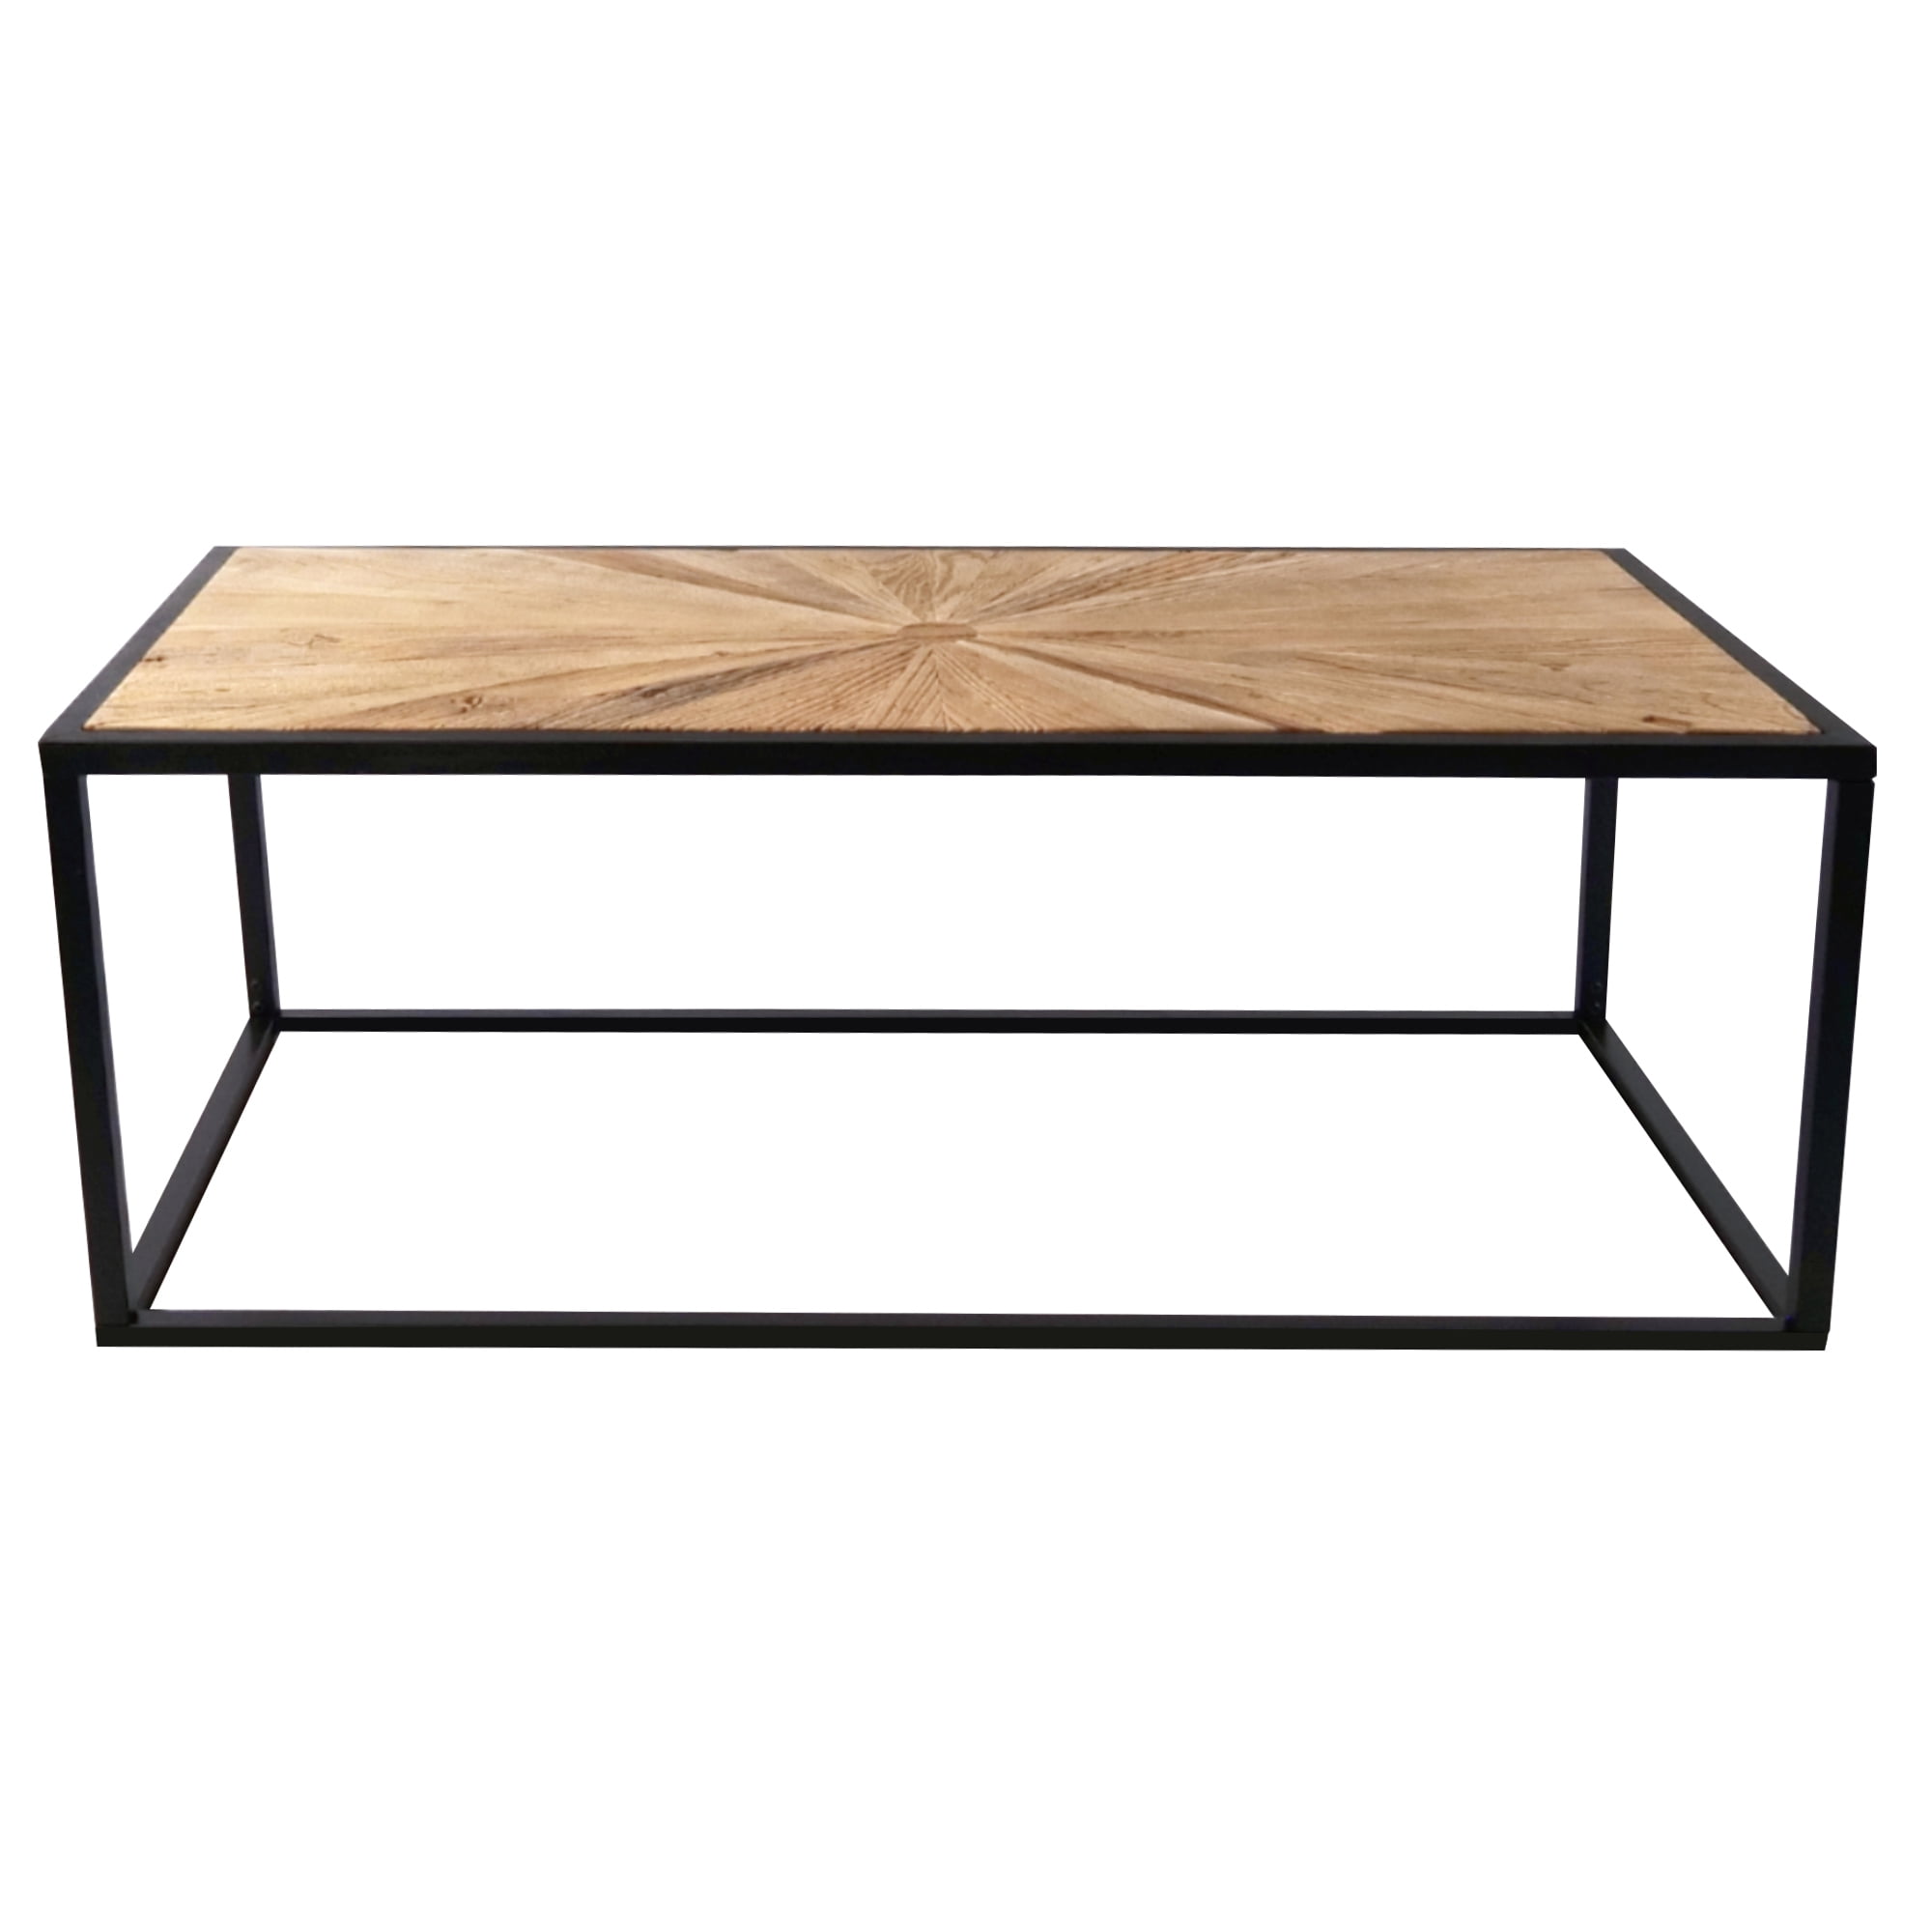 Lucia Coffee Table With Lift Up Storage 3D Textured Black Lounge Riser SALE 